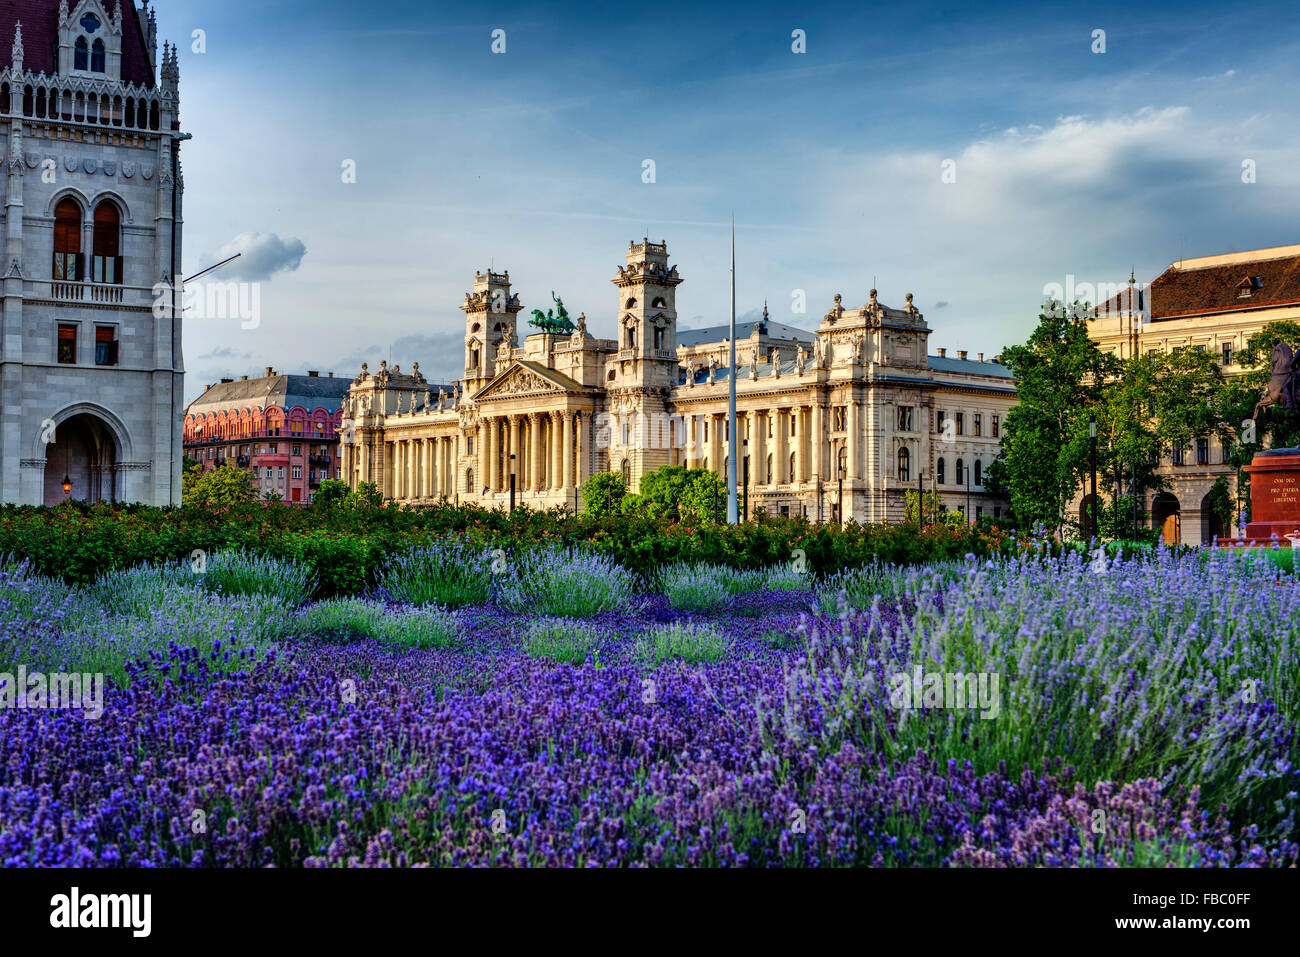 Ministry of Agirculture building, Museum of Ethnography, Parliment, Kossuth Lajos Ter, Budapest, Hungary, Lavender, Stock Photo